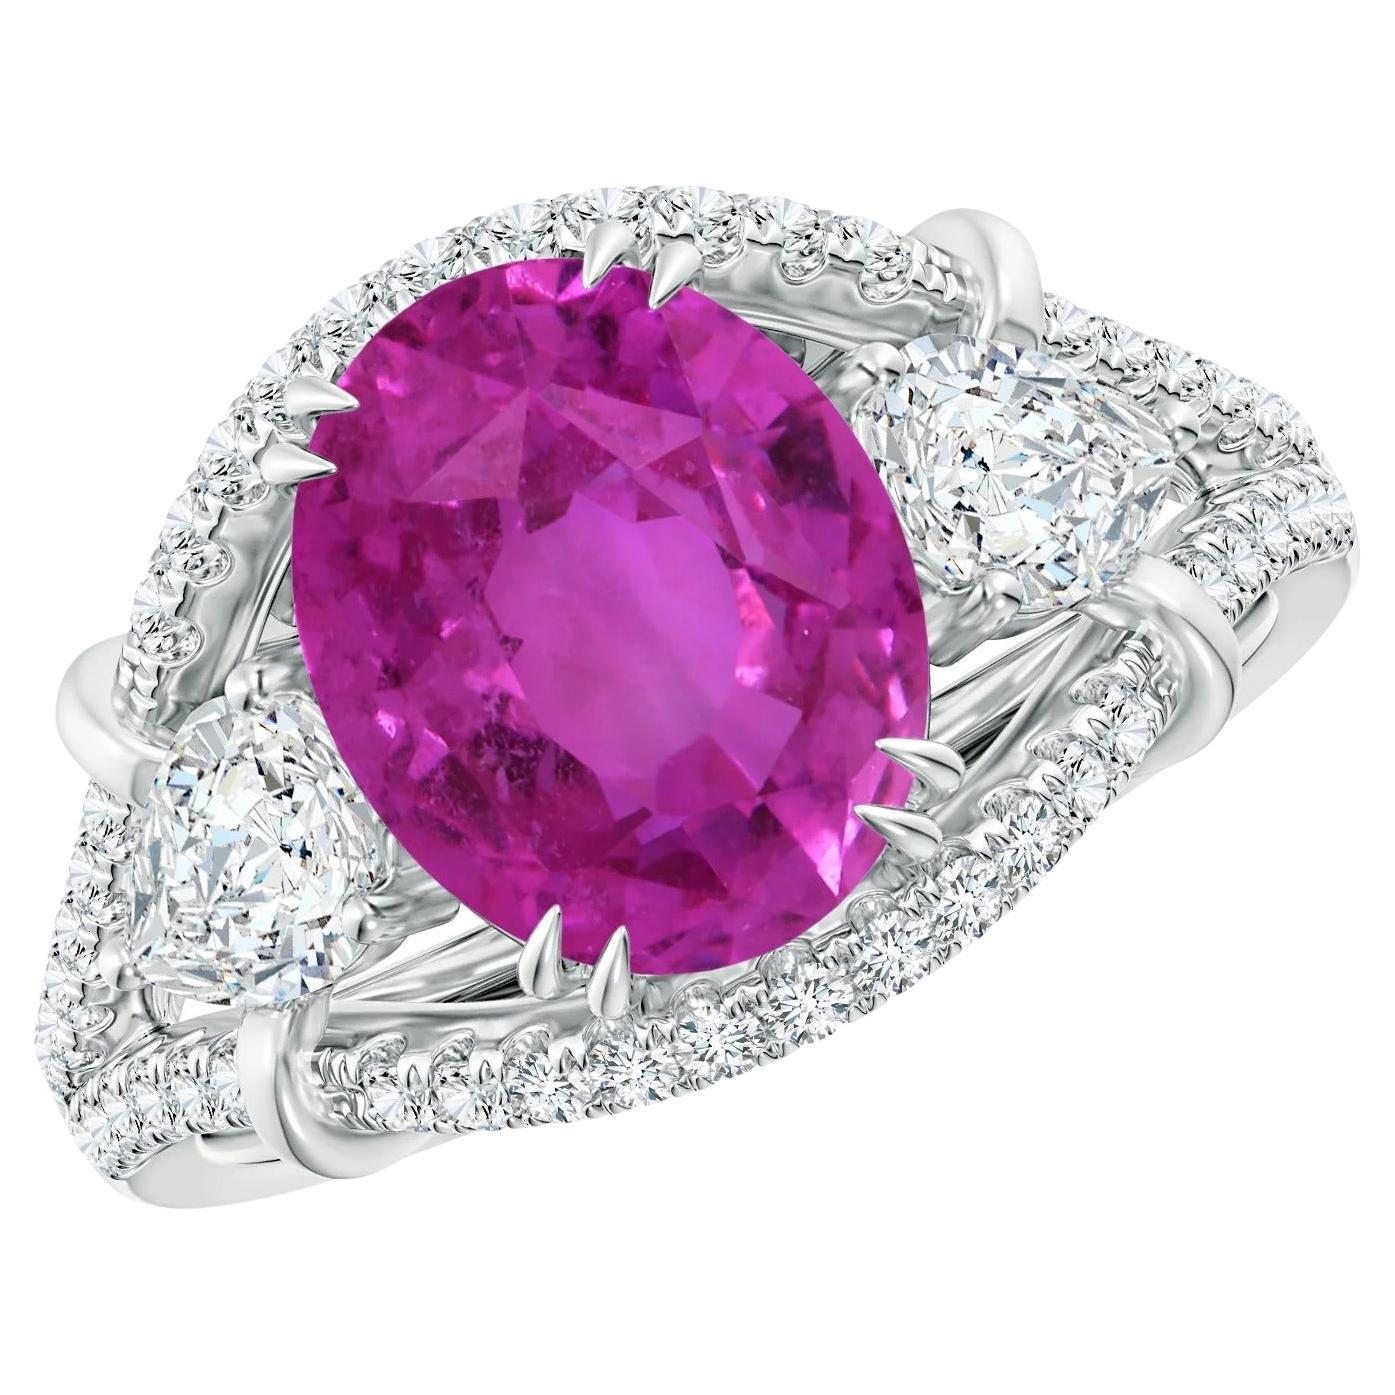 For Sale:  GIA Certified Natural Pink Sapphire Ring in White Gold with Diamonds